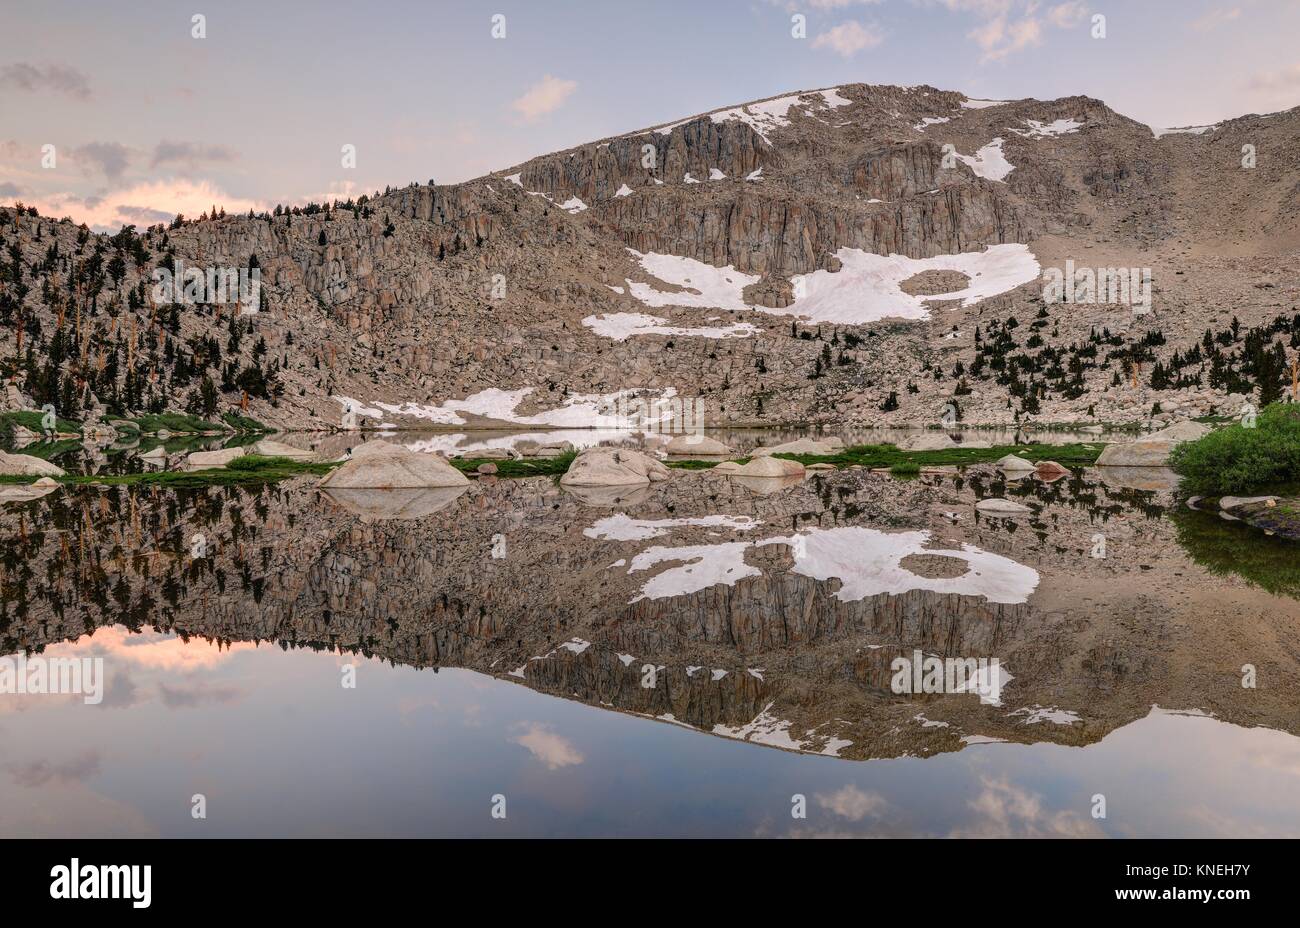 Morning Reflections in Chicken Spring Lake, Inyo National Forest, California, USA Stockfoto